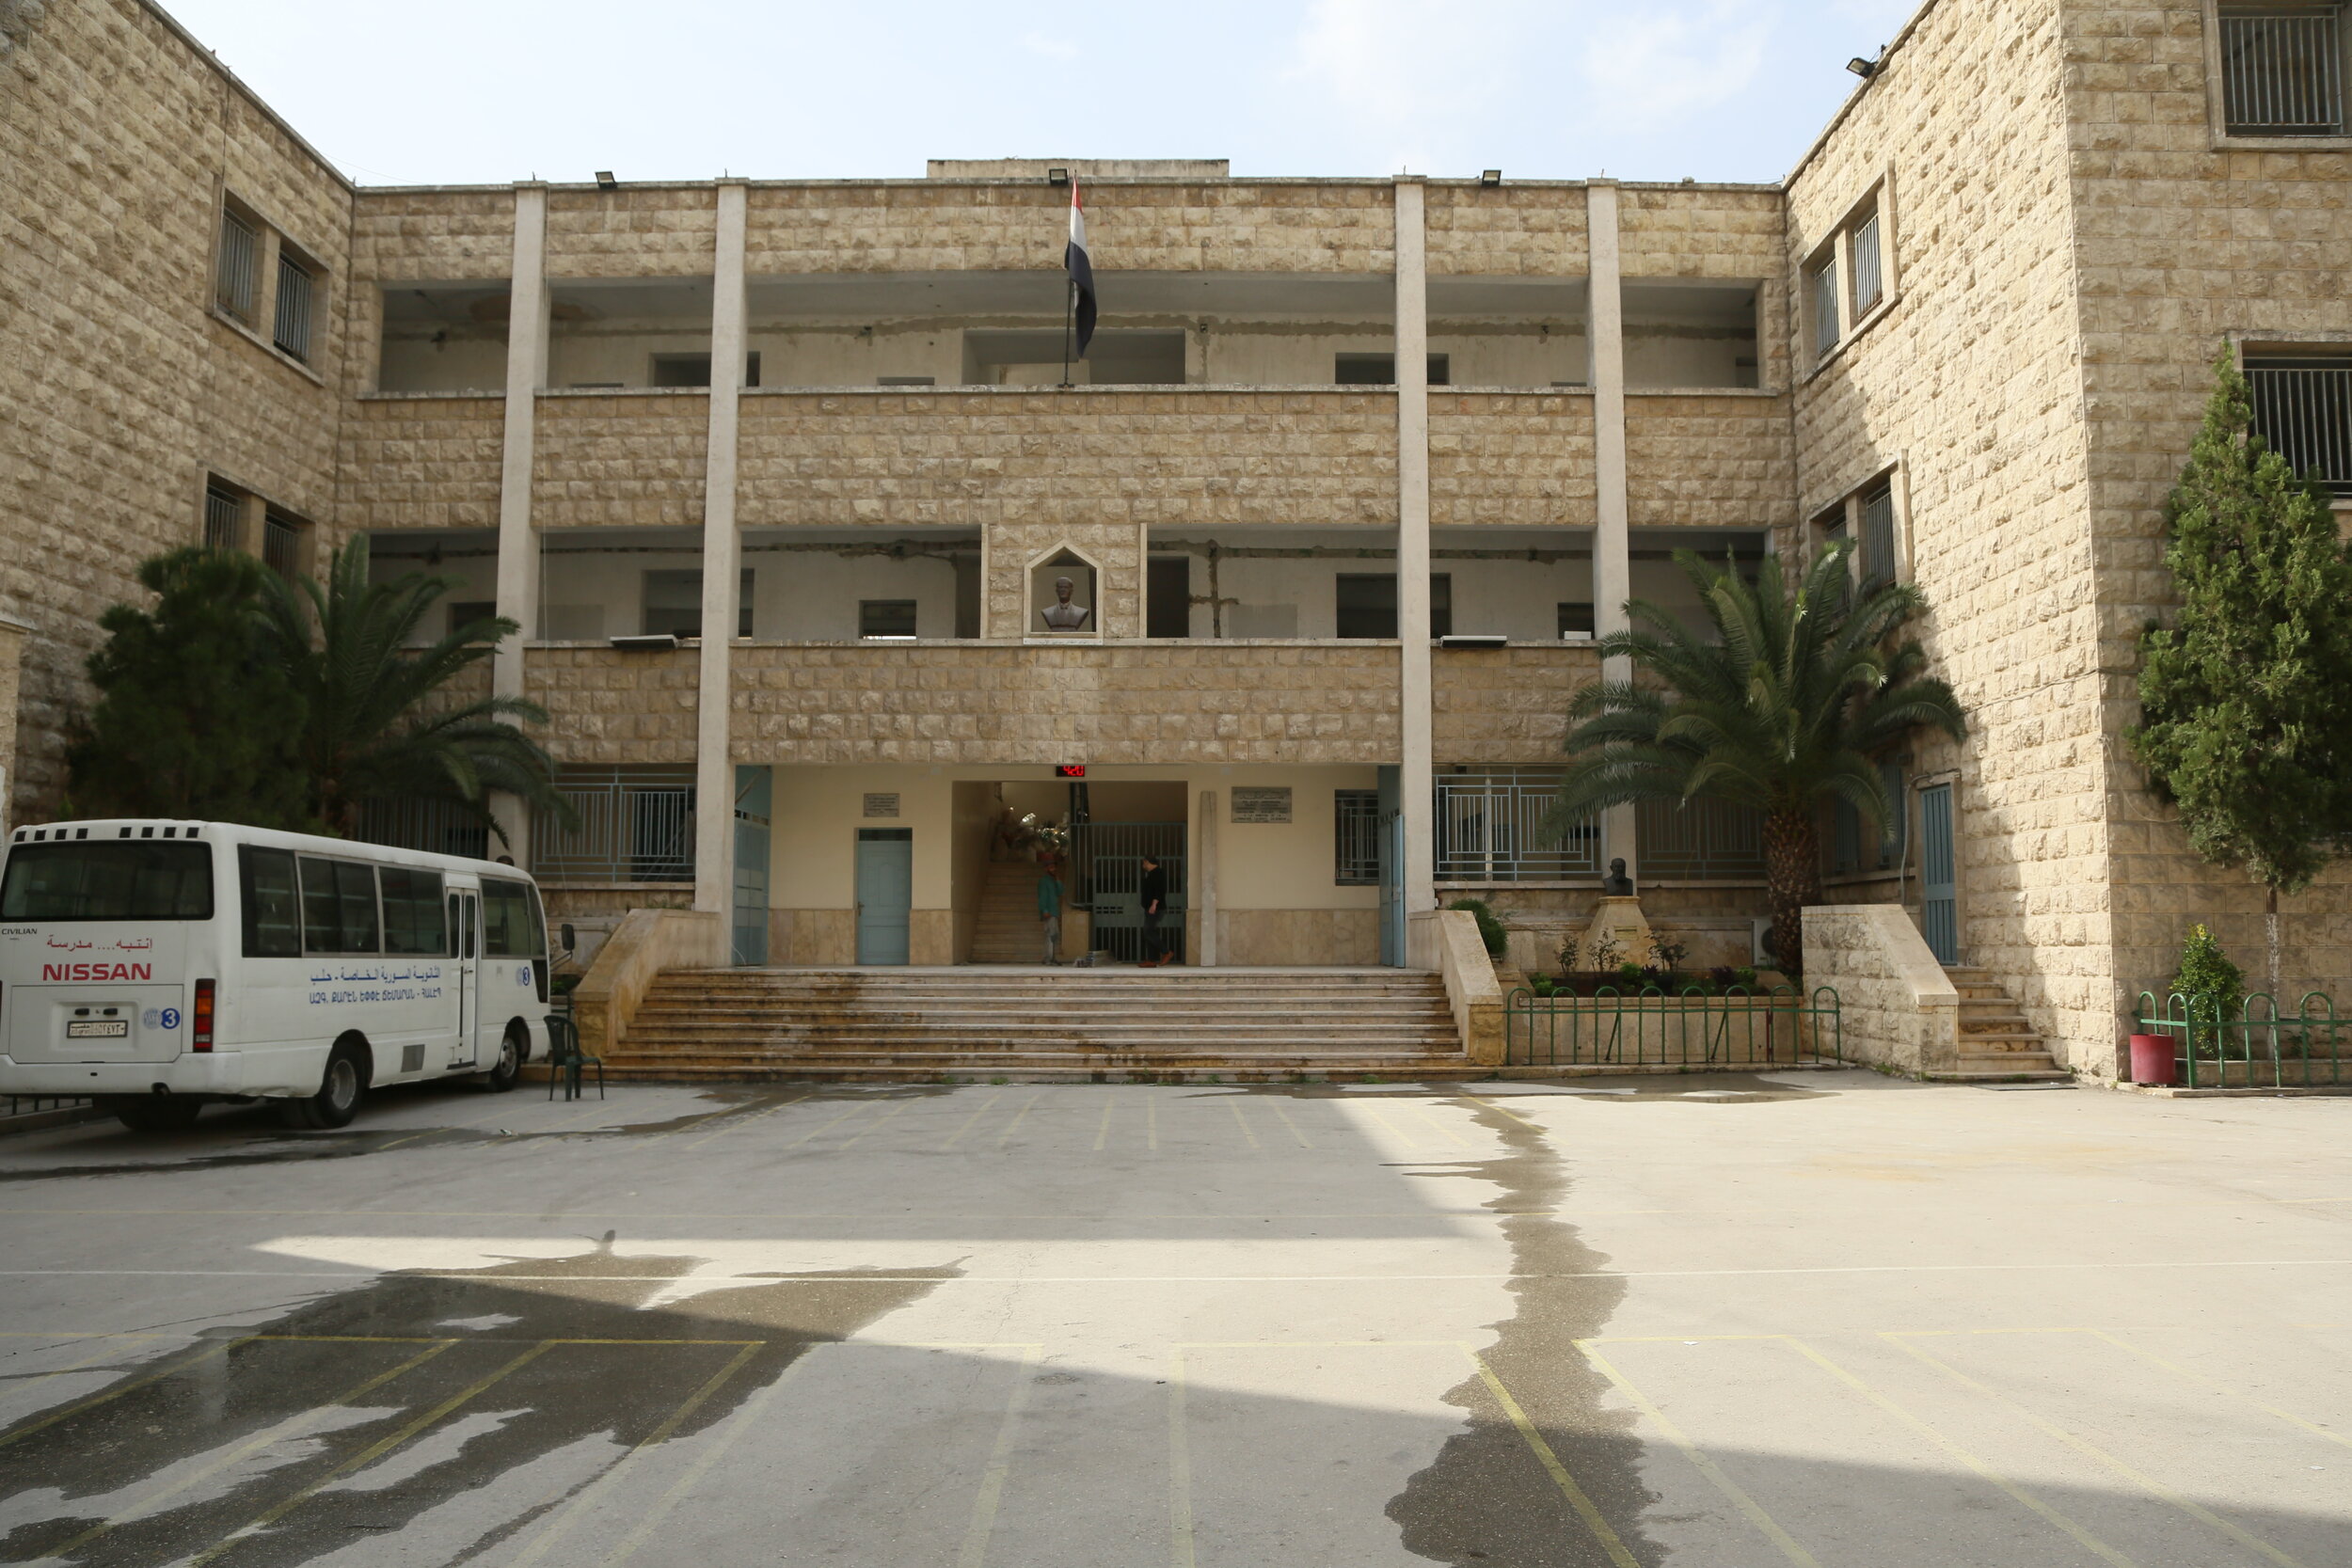 Private syrian secondary school - during rehabilitation (2).JPG